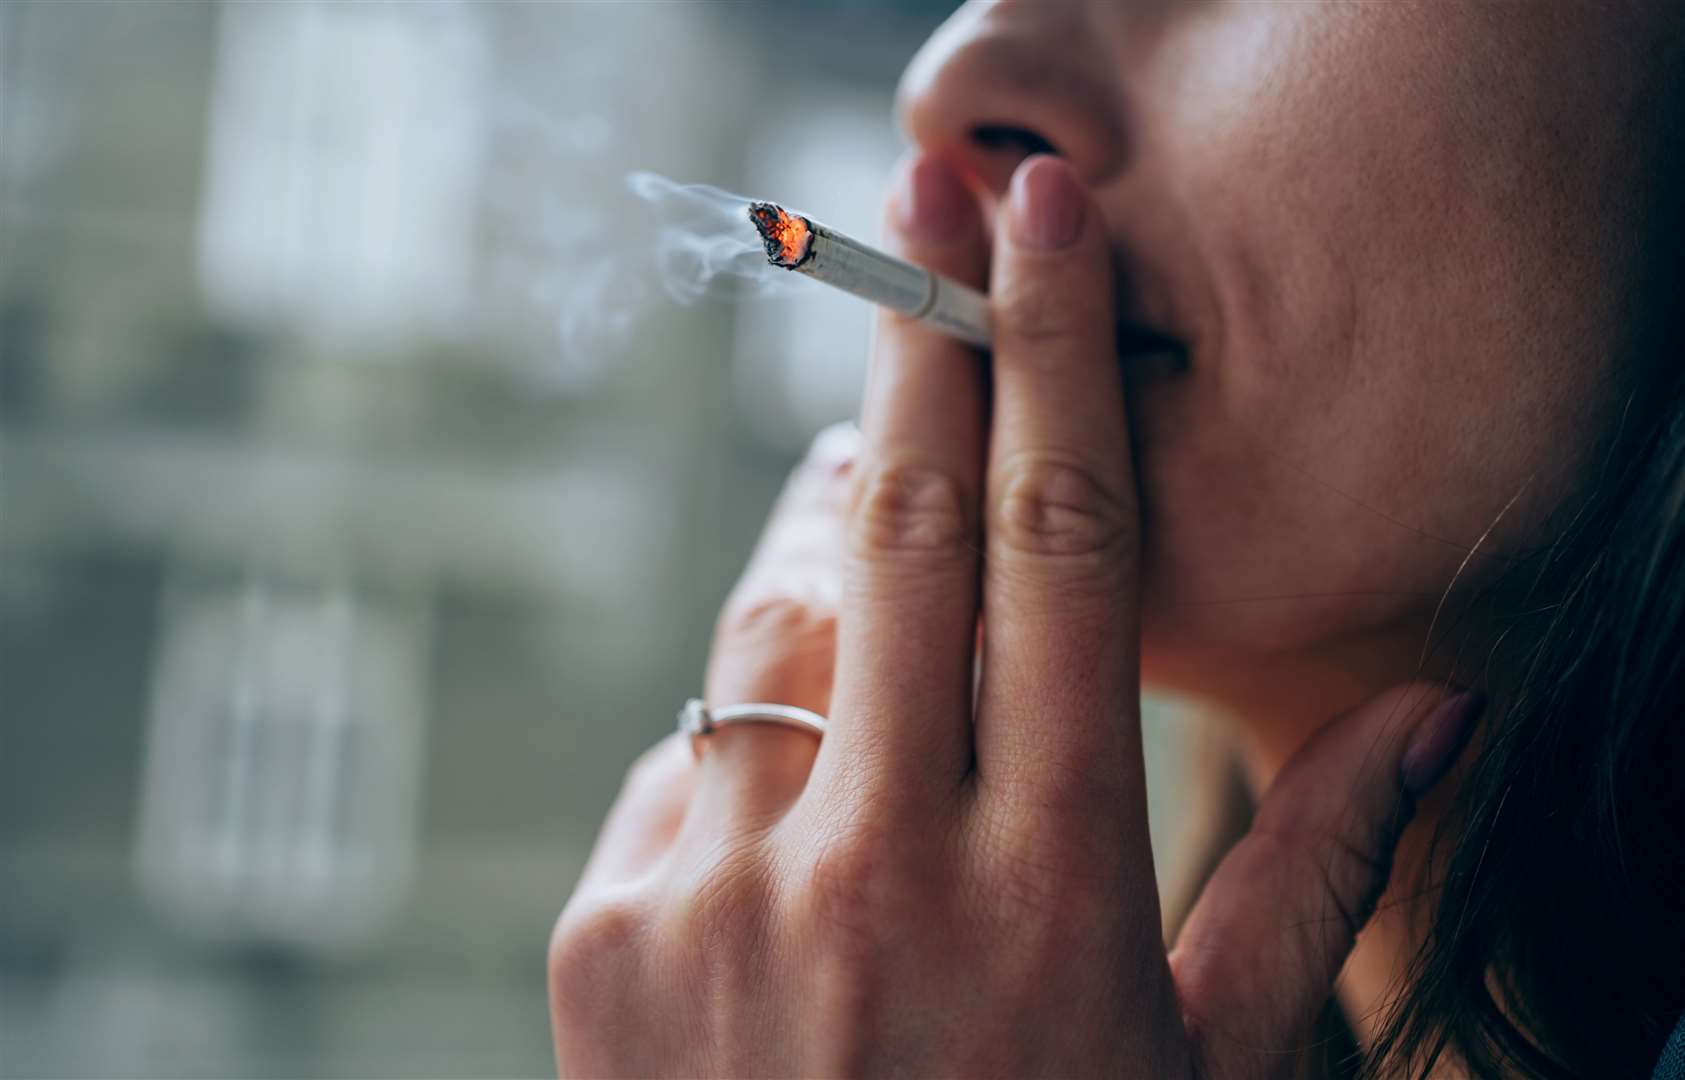 Smoking costs Kent a whopping £1.3 billion a year, according to new statistics. Picture: iStock